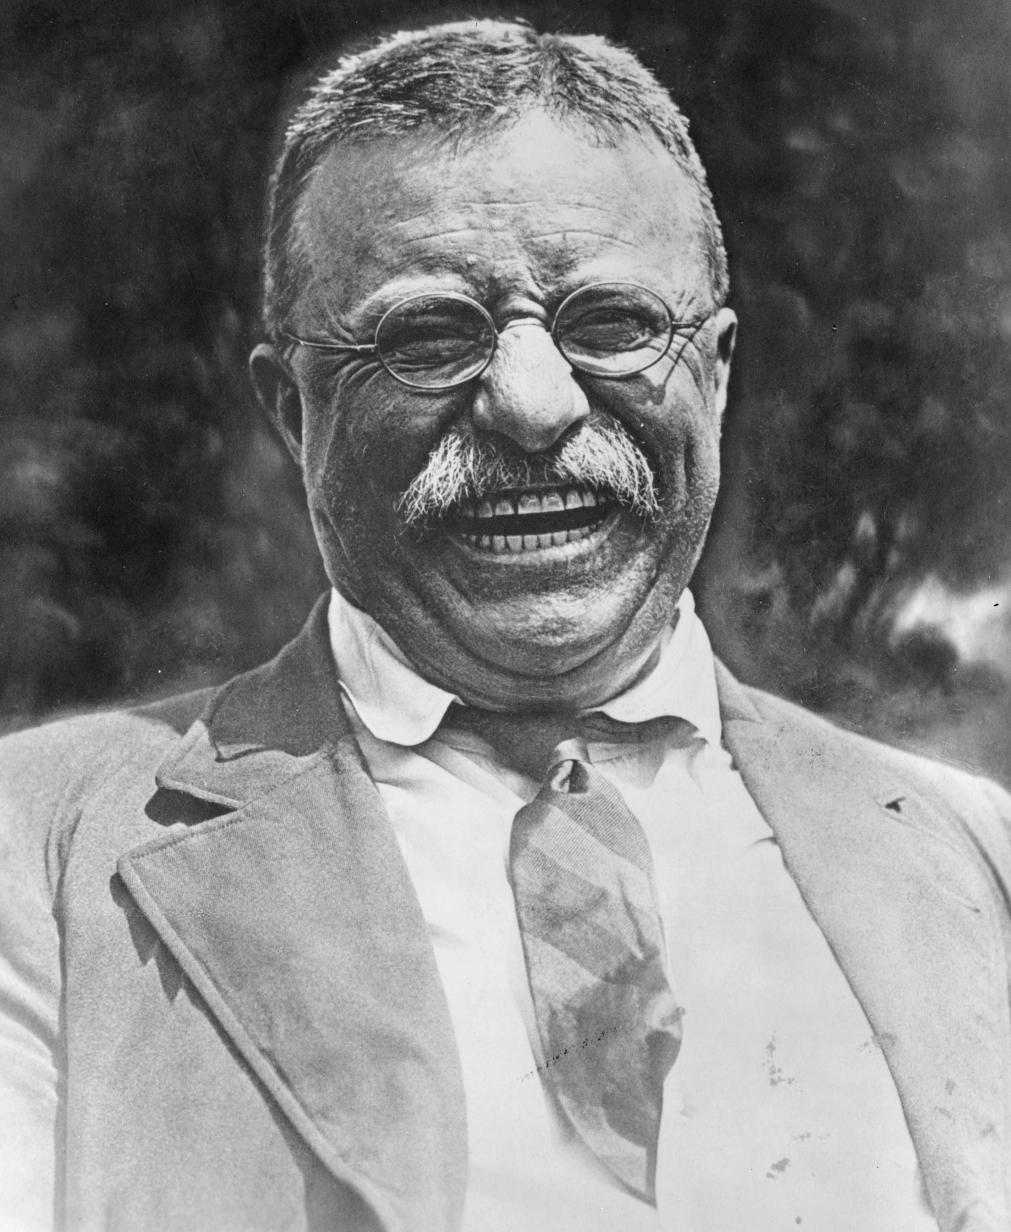 Theodore Roosevelt e. Presidential Style i. Playful, fun, dramatic, loved the press and the public ii.